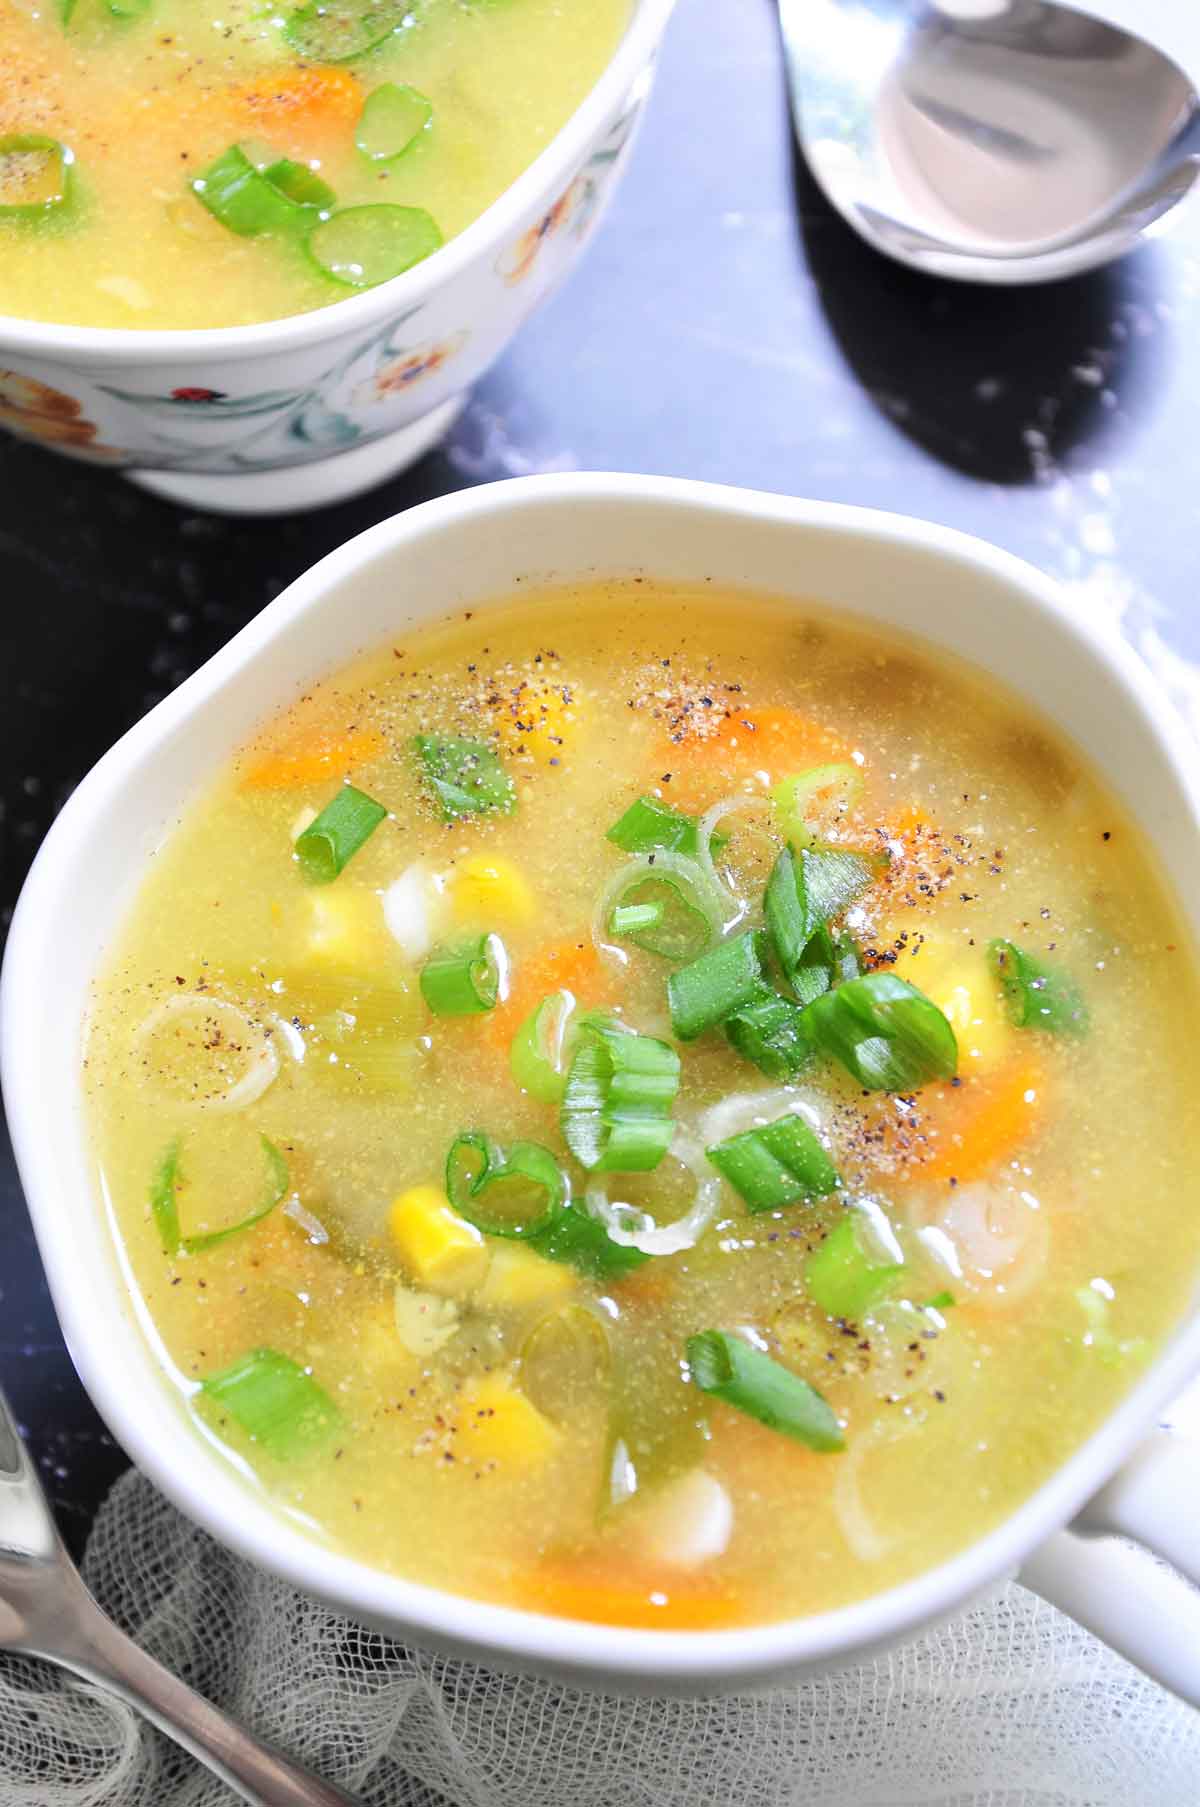 Sweet corn soup in a bowl garnished with spring onion.